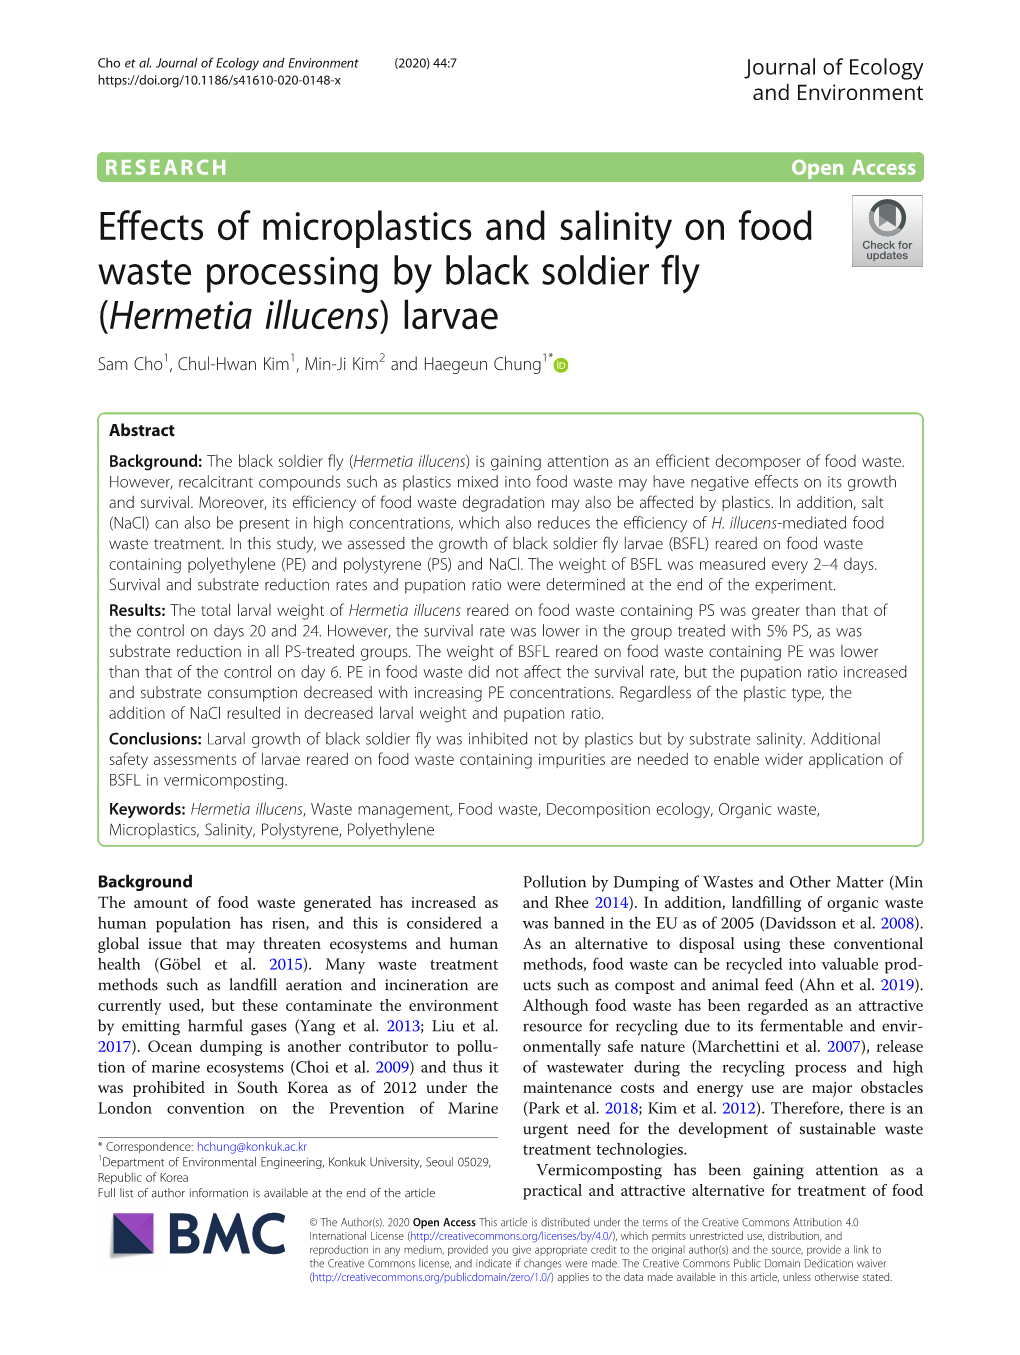 Effects of Microplastics and Salinity on Food Waste Processing by Black